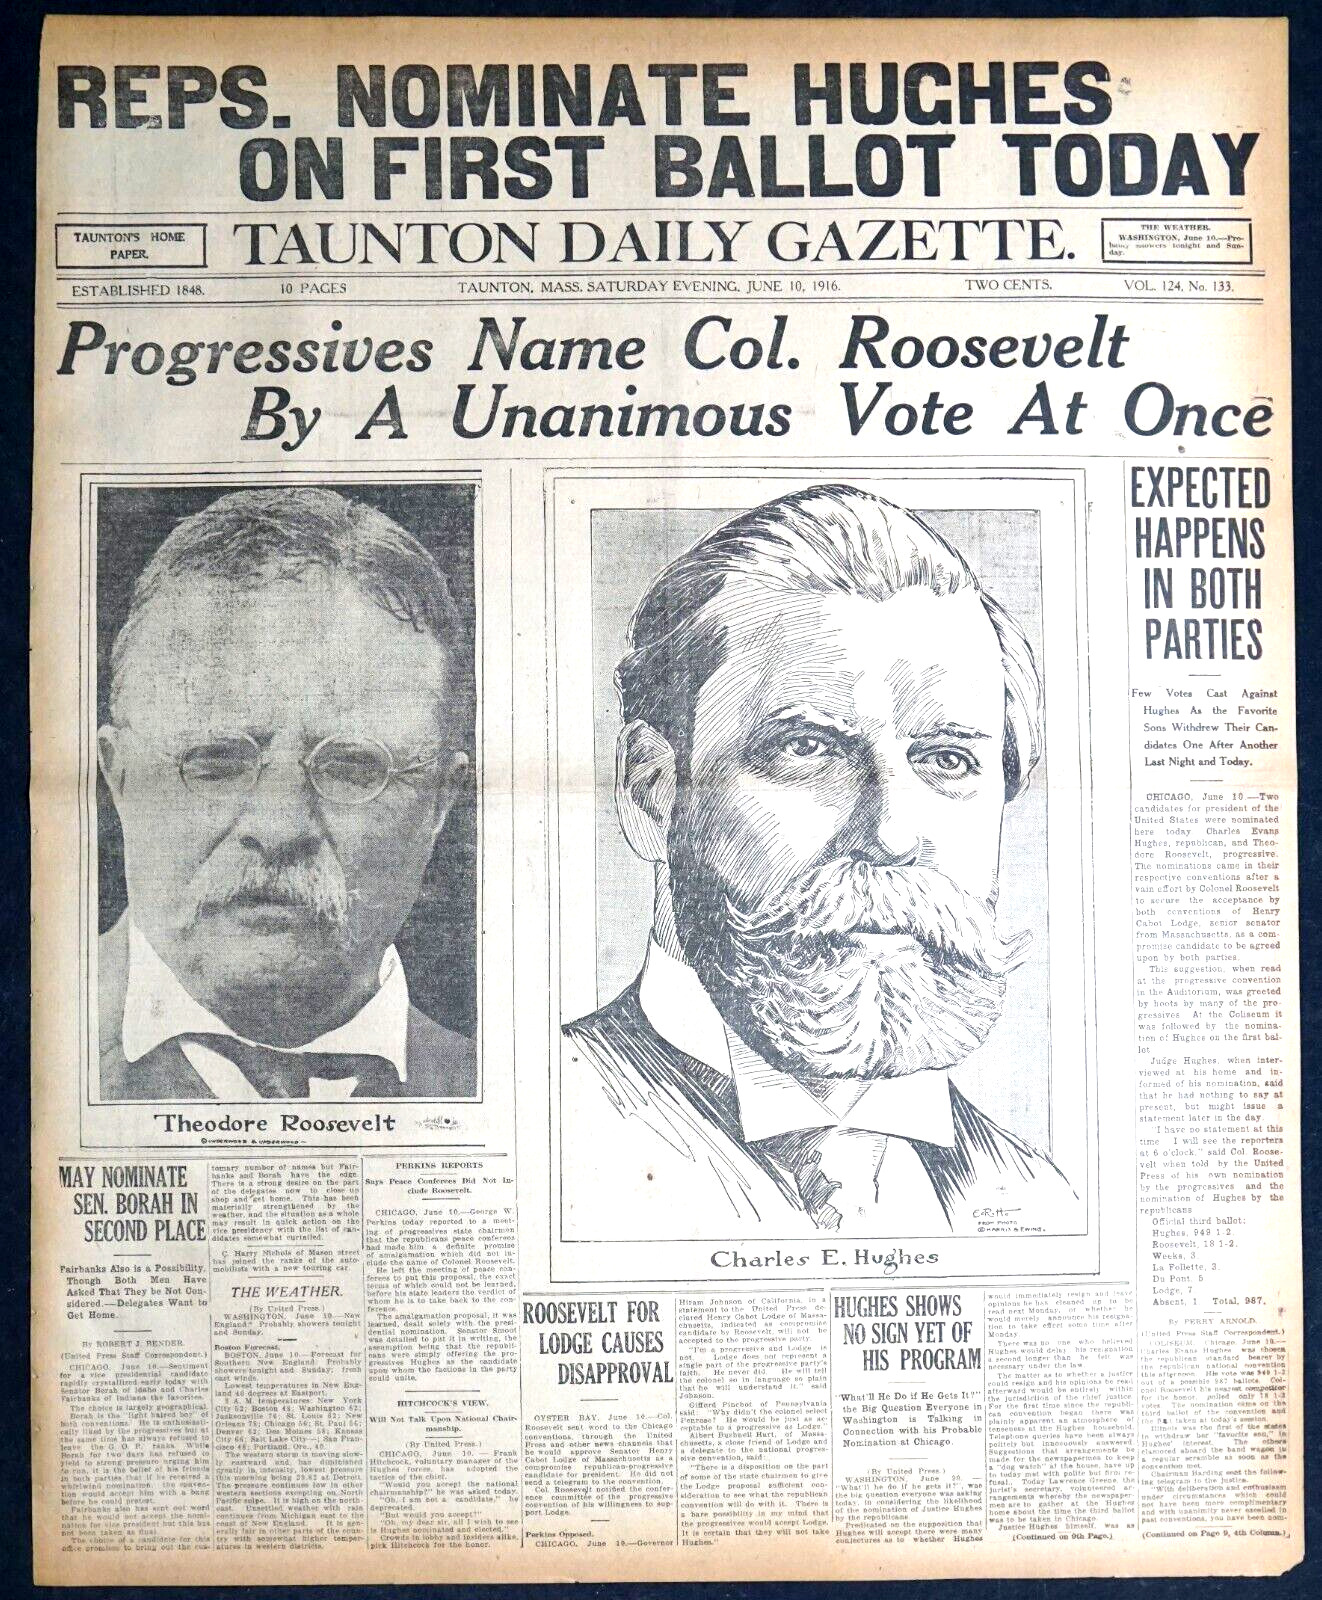 1916 Newspaper Front Page - Progressives Nominate Theodore Roosevelt Unanimously